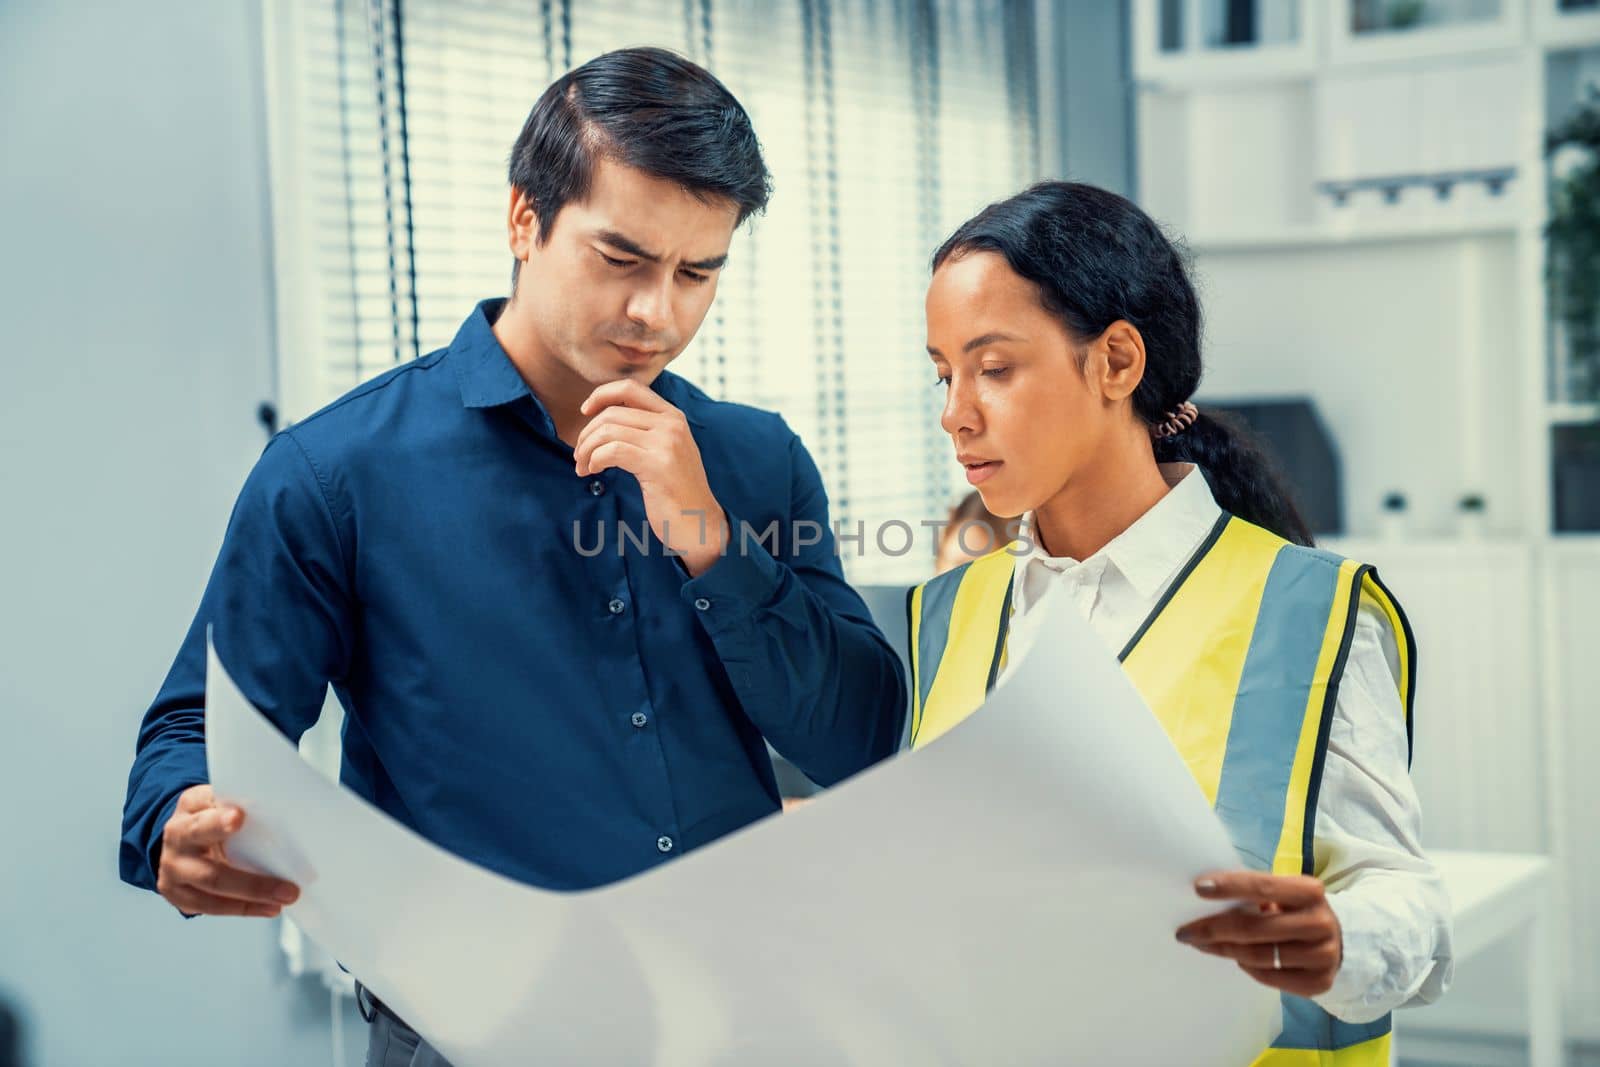 Competent investor investor discuss and brainstorm with engineer on blueprints, construction plans before putting them into action. Professional establishing investment plan for engineering projects.